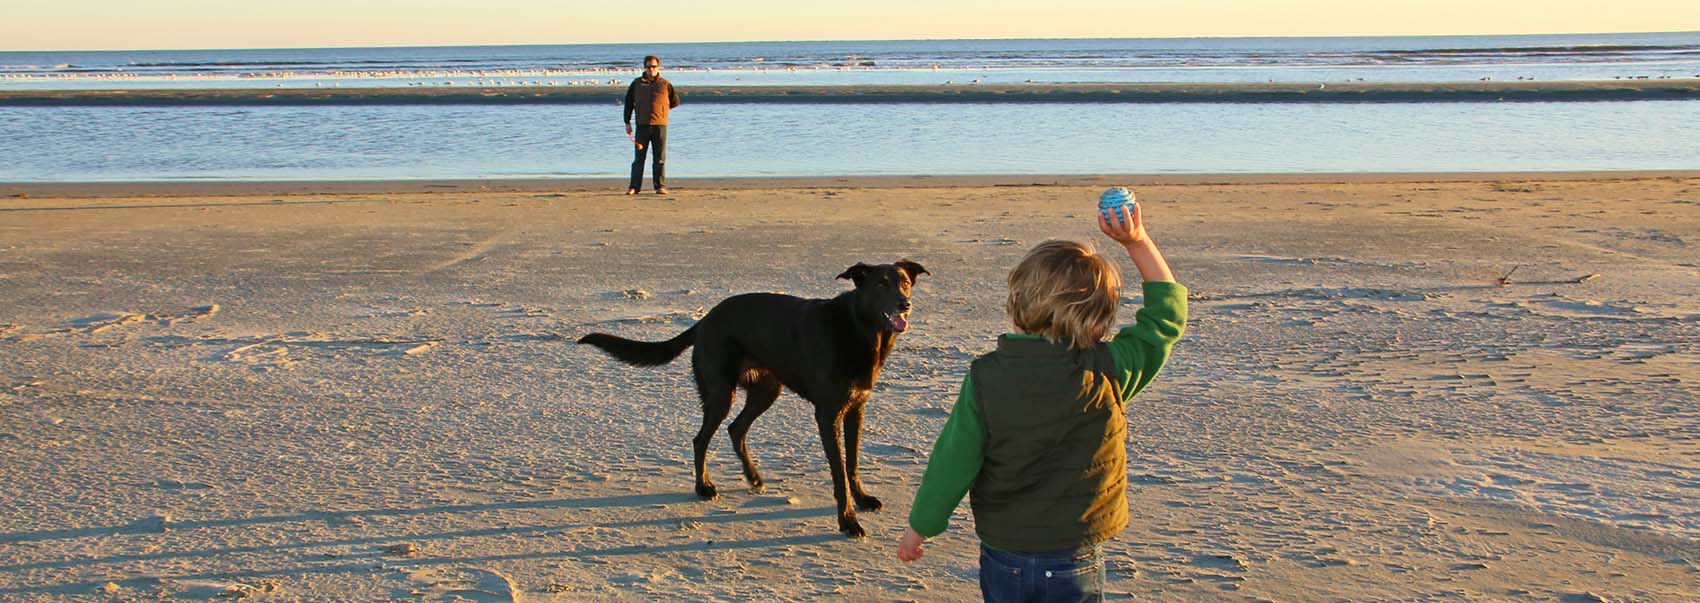 Playing with the dog at the beach